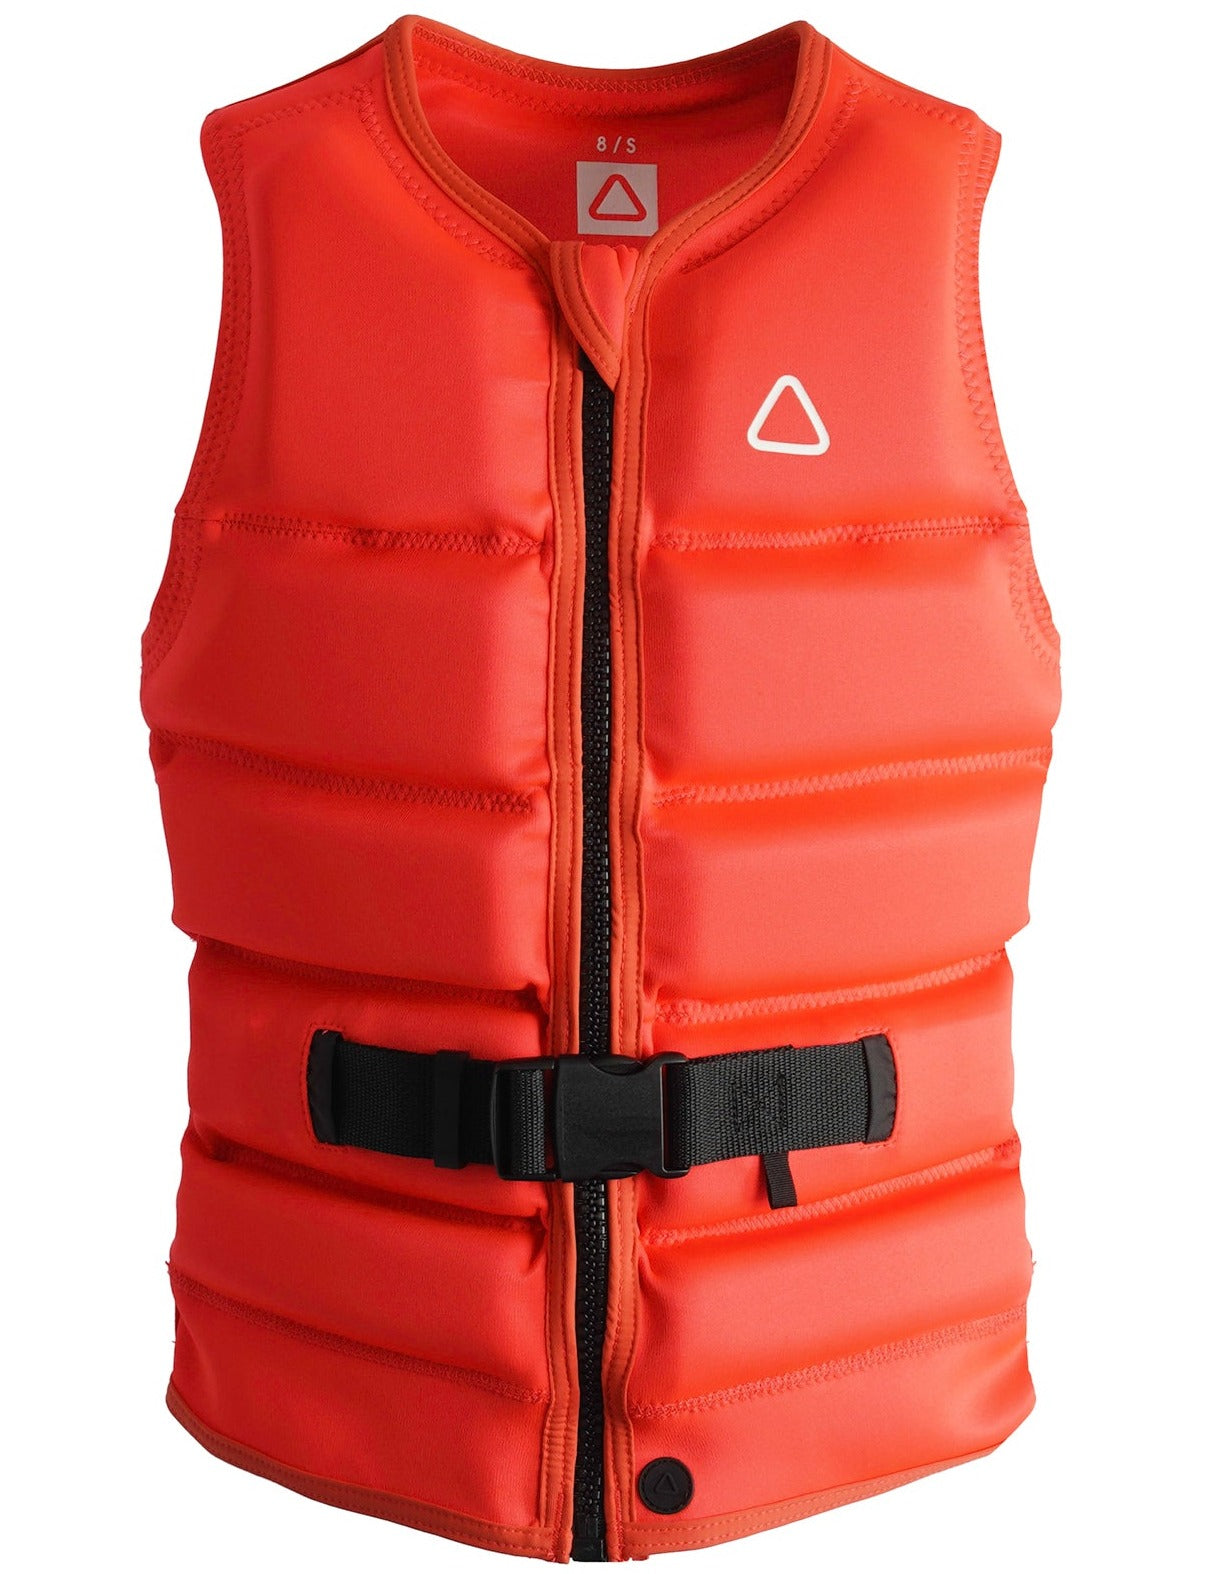 Follow Primary Life Jacket - Fluro Red